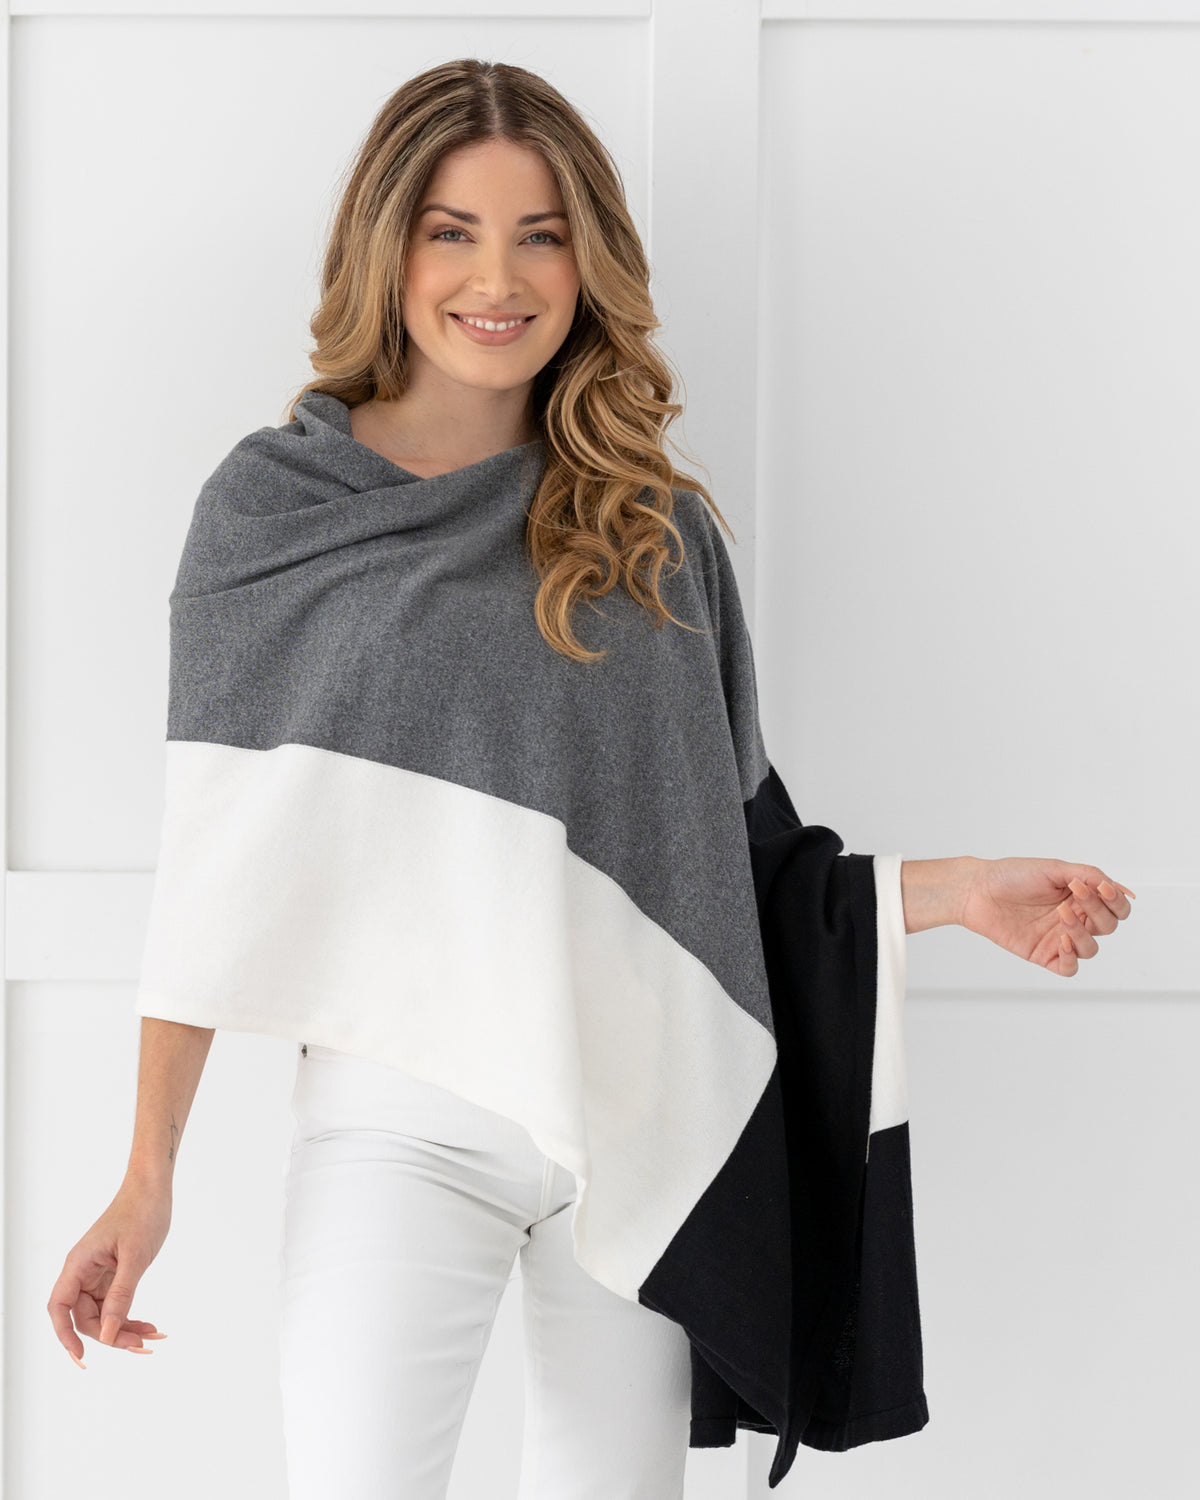 Woman wearing the Dreamsoft Travel Scarf in Gray Colorblock which is a black, gray and cream scarf, while smiling and looking at the camera